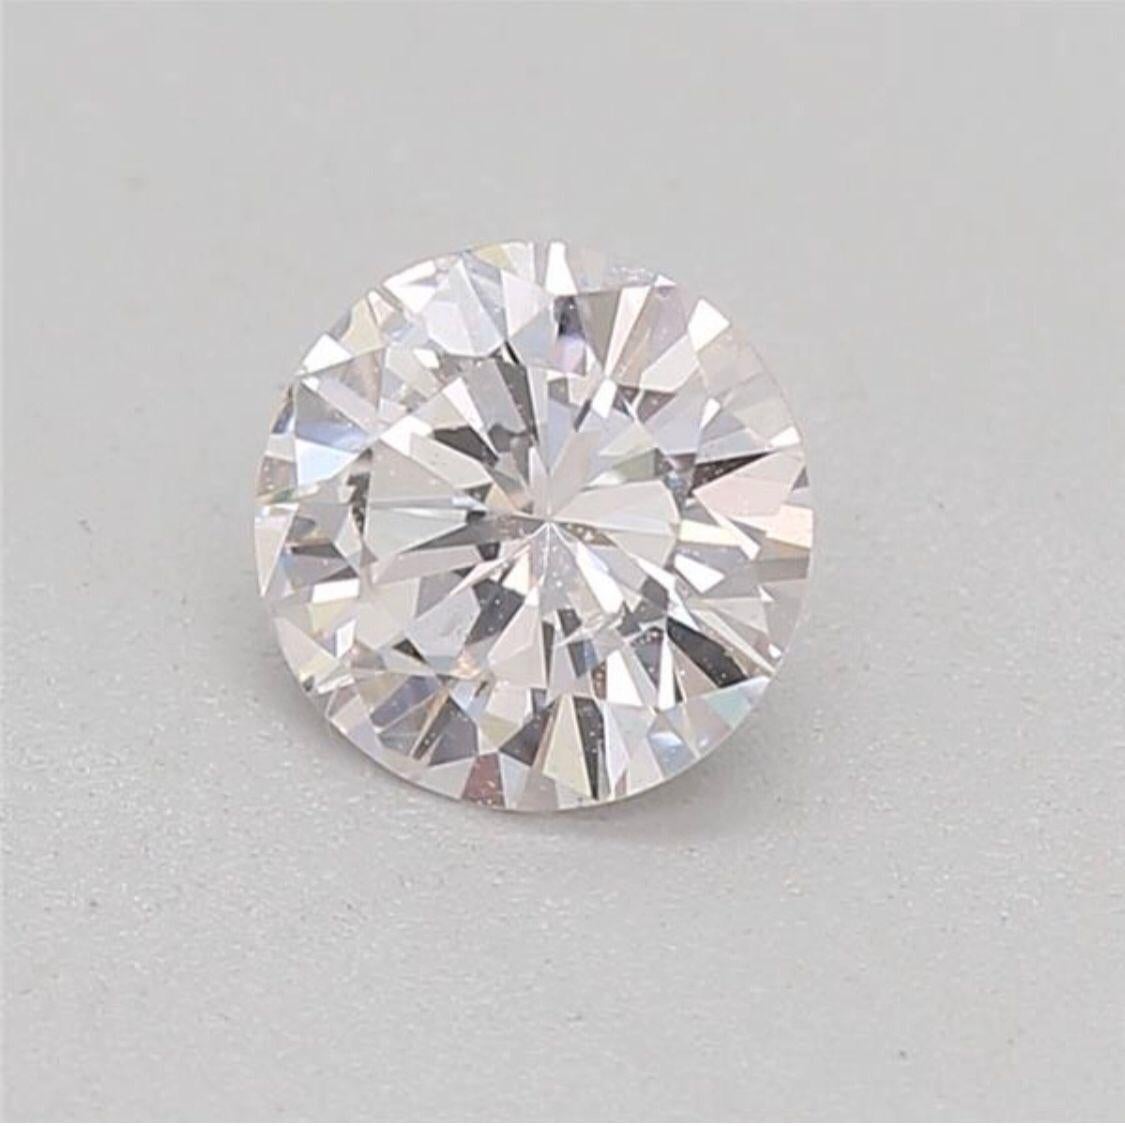 0.31 Carat Faint Pink Round Cut Diamond SI1 Clarity CGL Certified For Sale 10